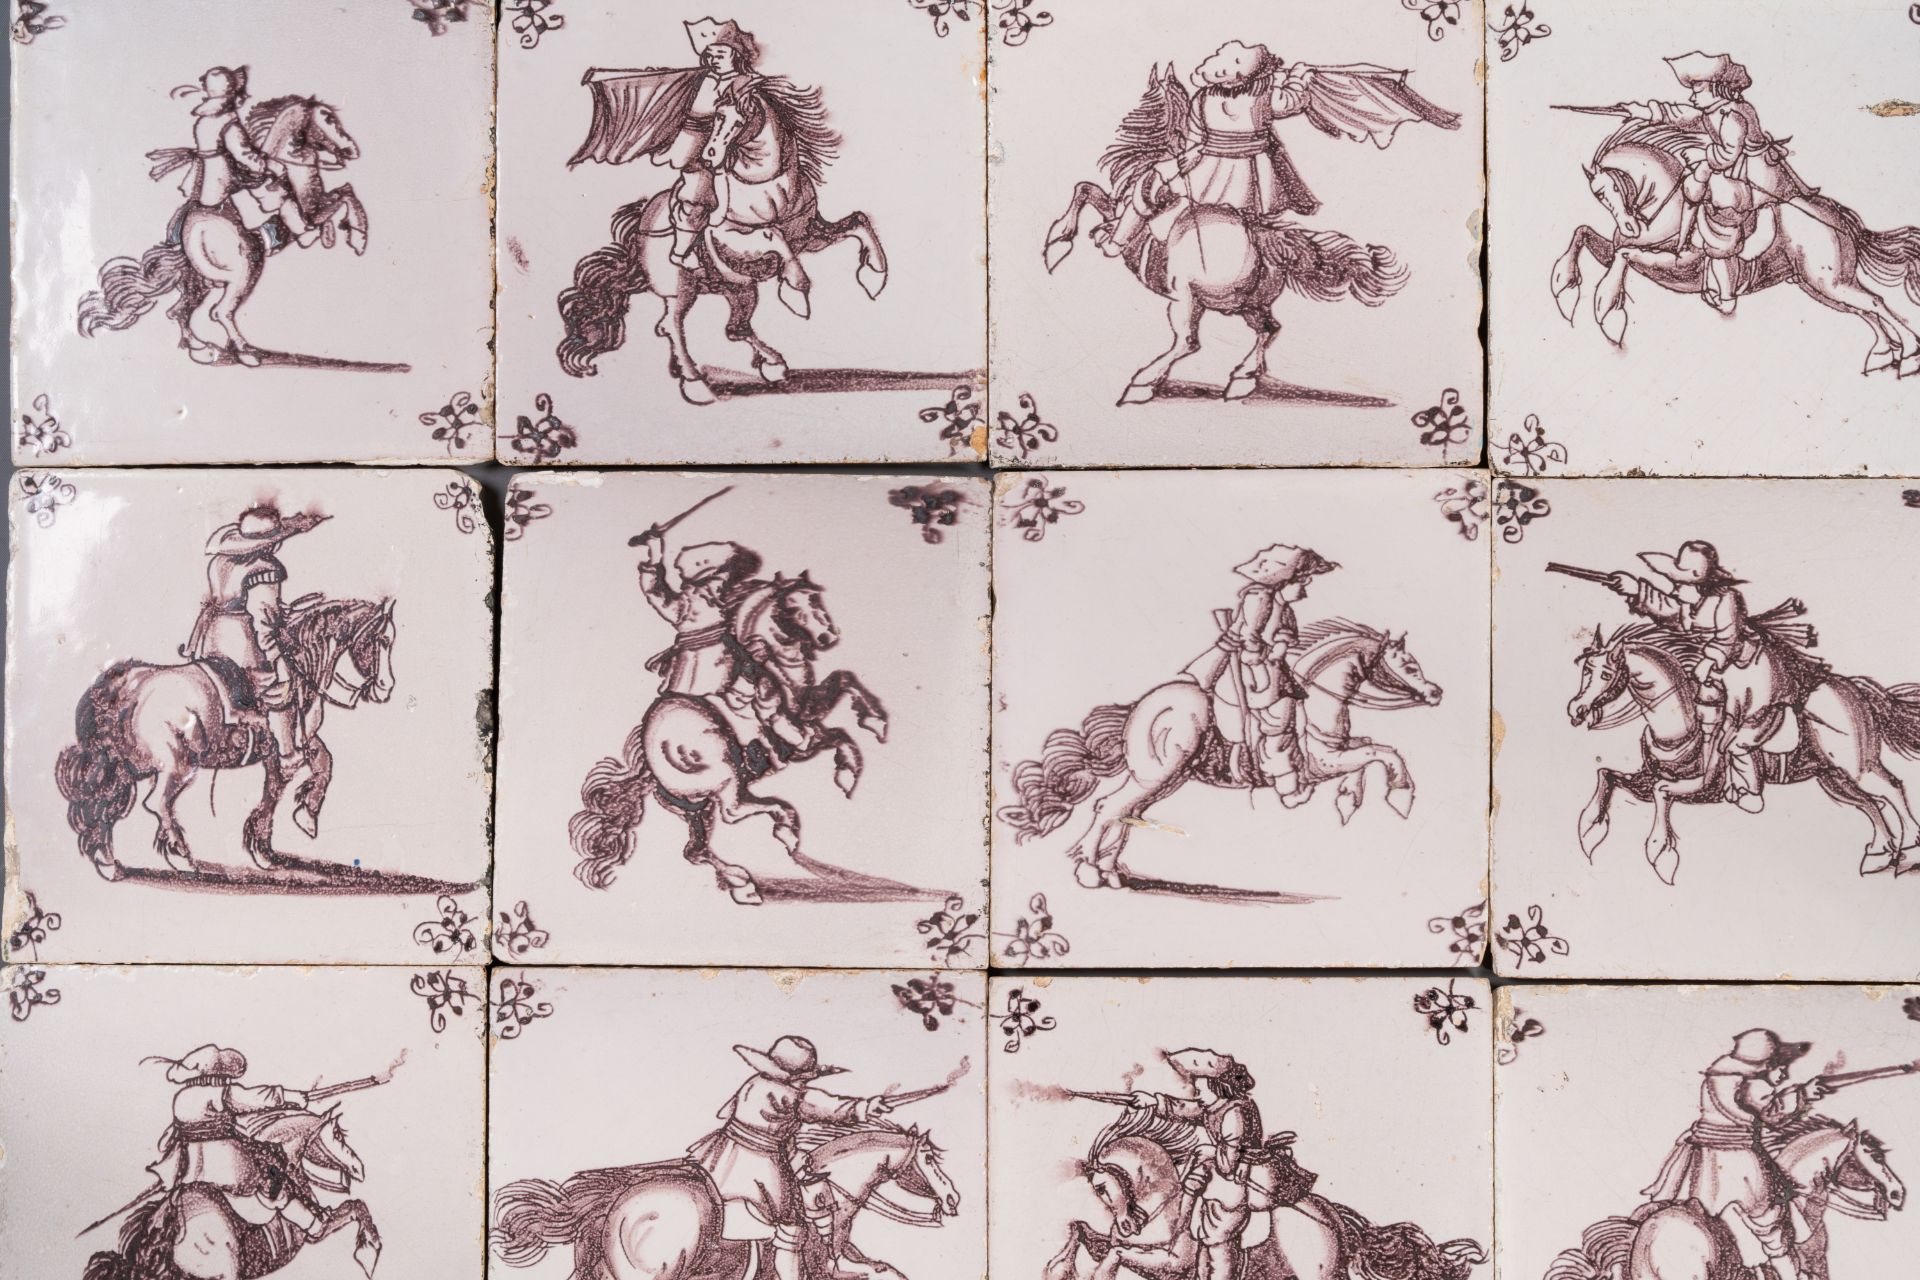 Fifteen Dutch Delft manganese tiles with horse riders, late 17th C. - Bild 3 aus 13